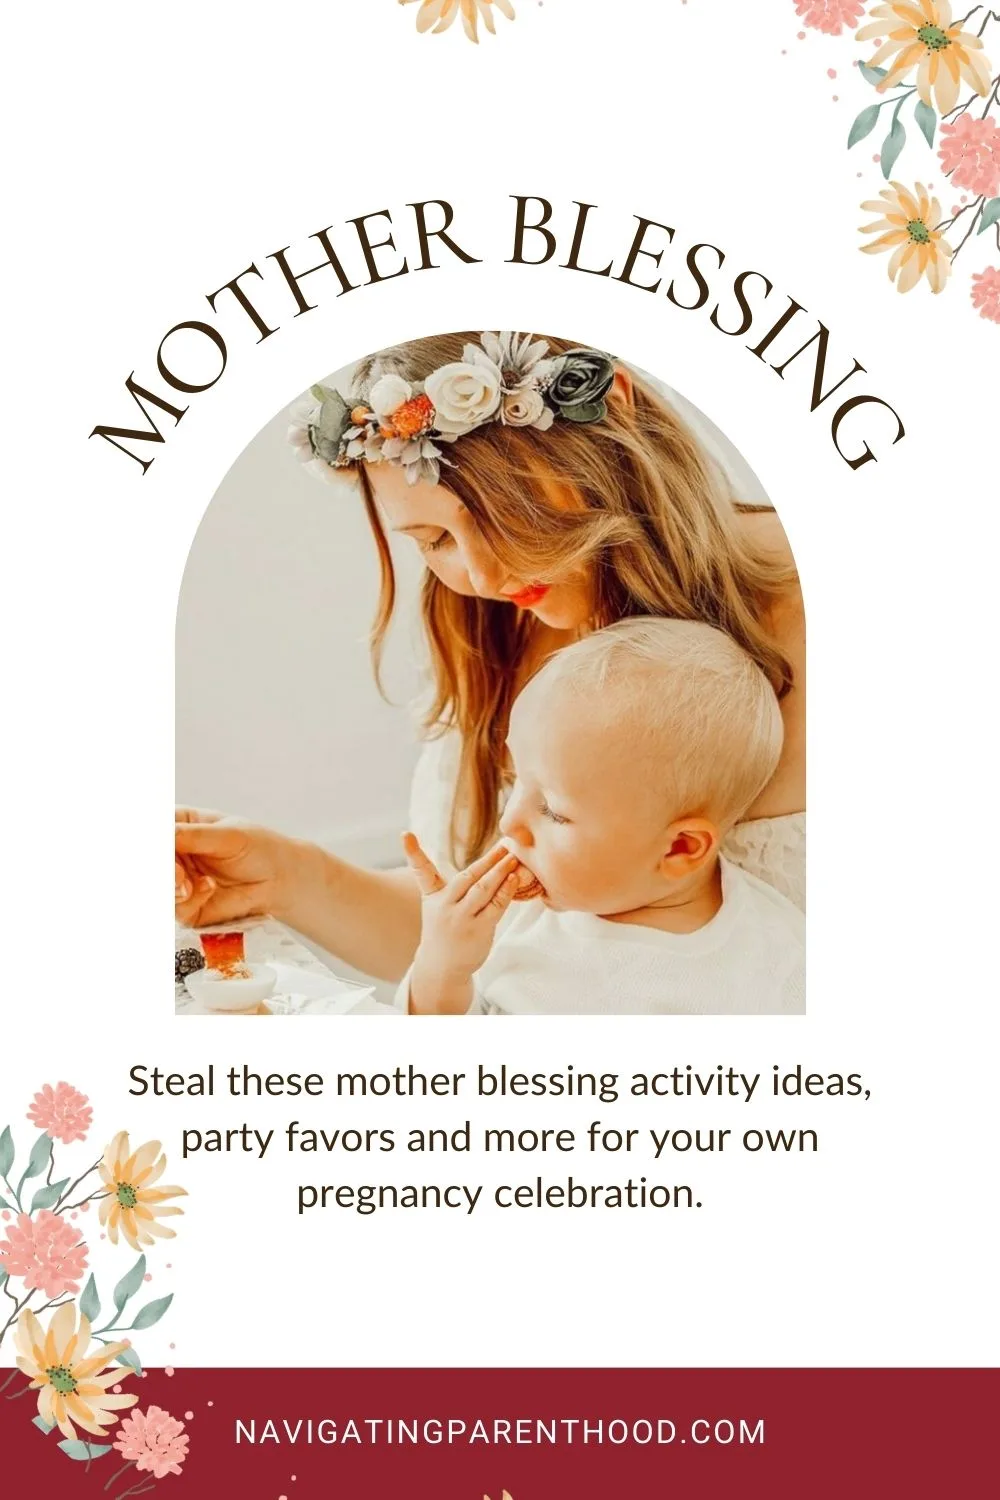 Creating Lasting Memories: How to Plan a Meaningful Mother Blessing Ceremony